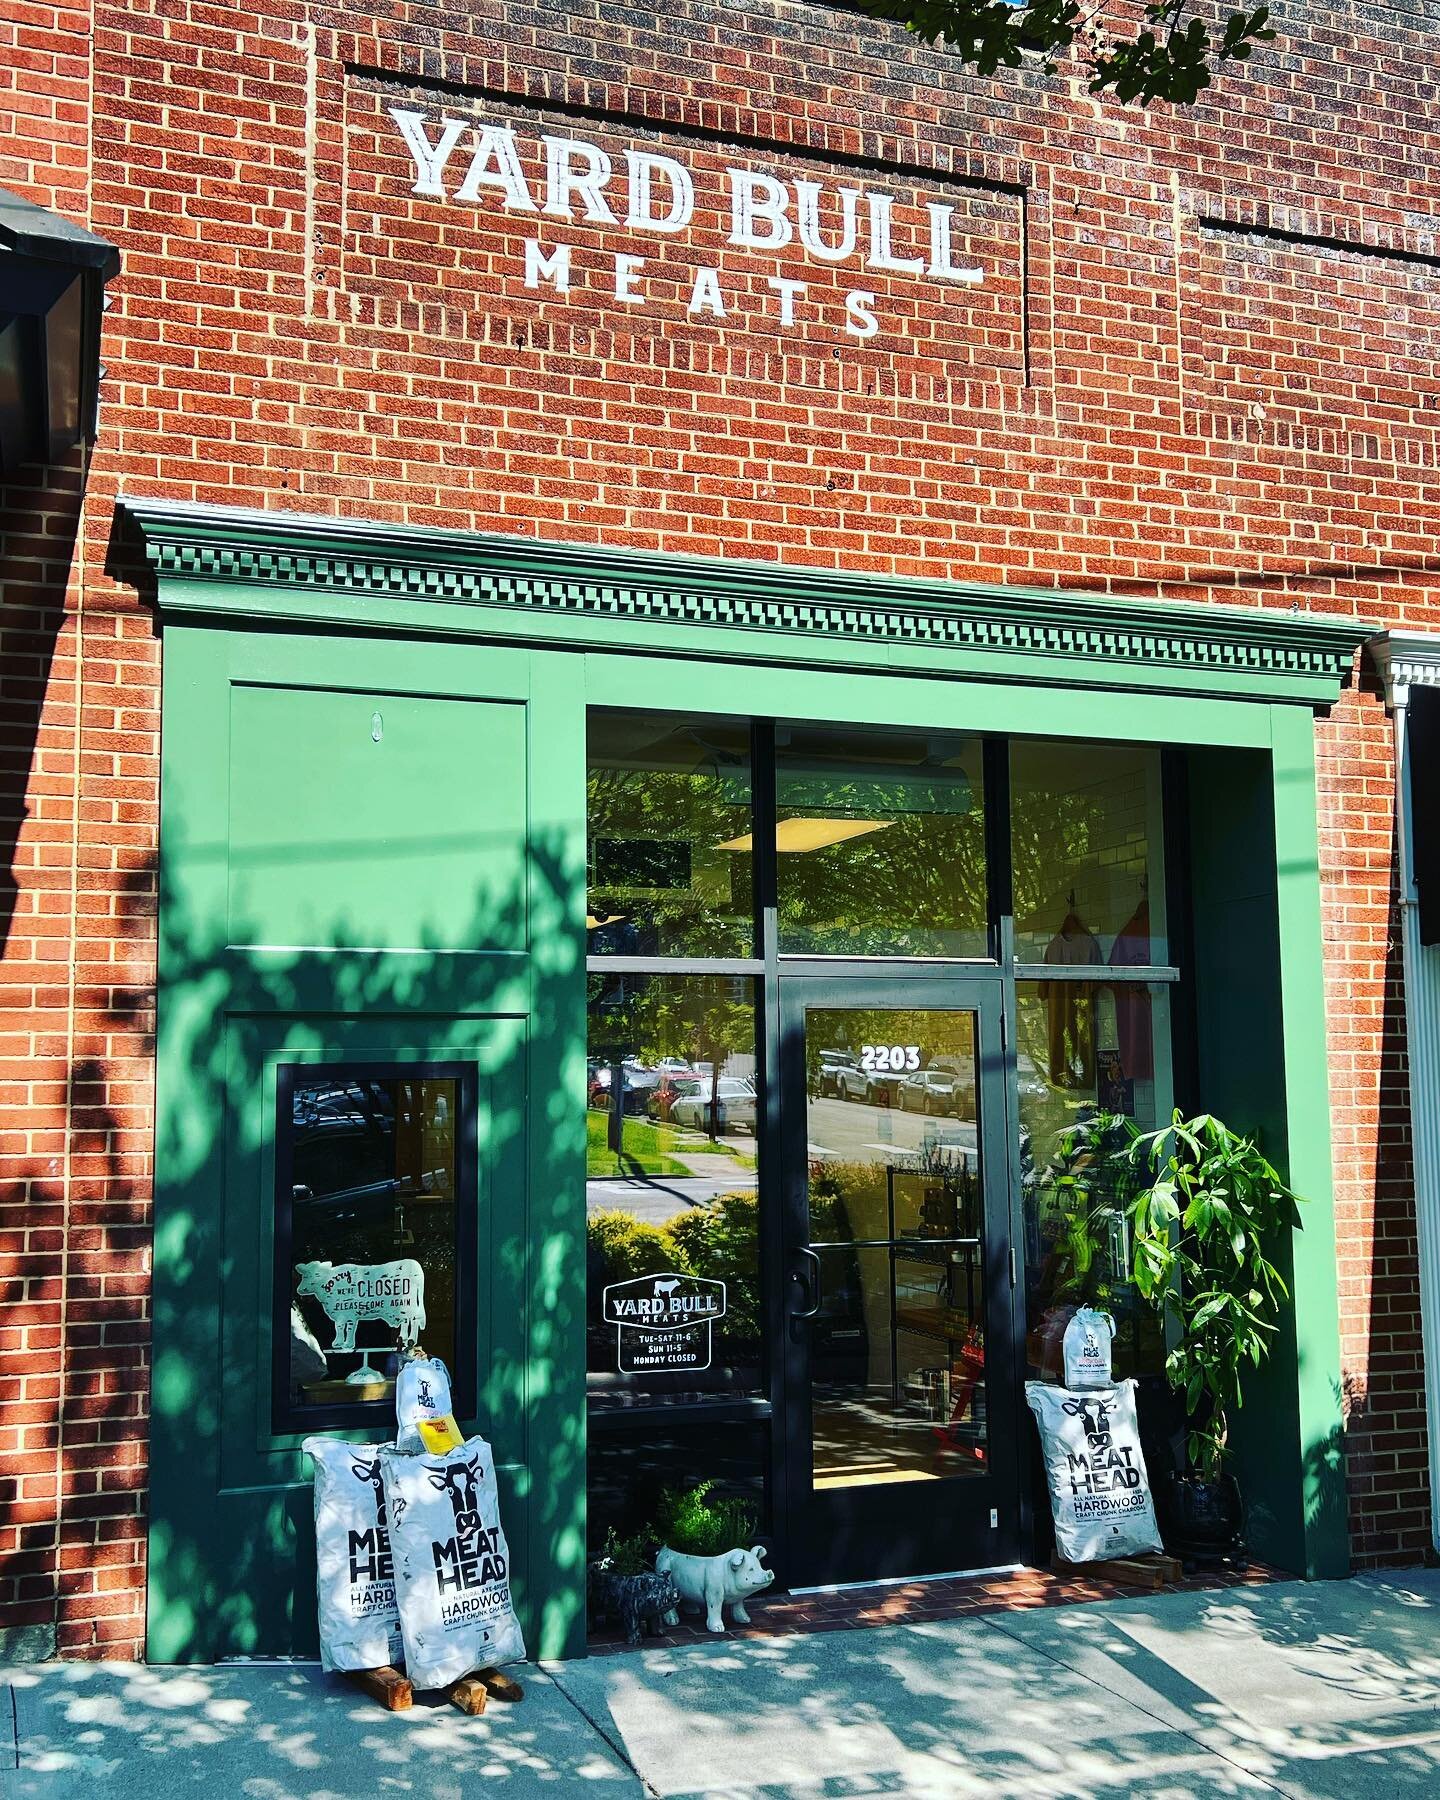 Here til 5 today, come say 👋 and get your Sunday supper supplies or your needs for the week!
.
#ybm #yardbullmeats #eatrke #sundaysupper #butcher #butchershop #supportsmallbusiness #supportyourlocalbutcher